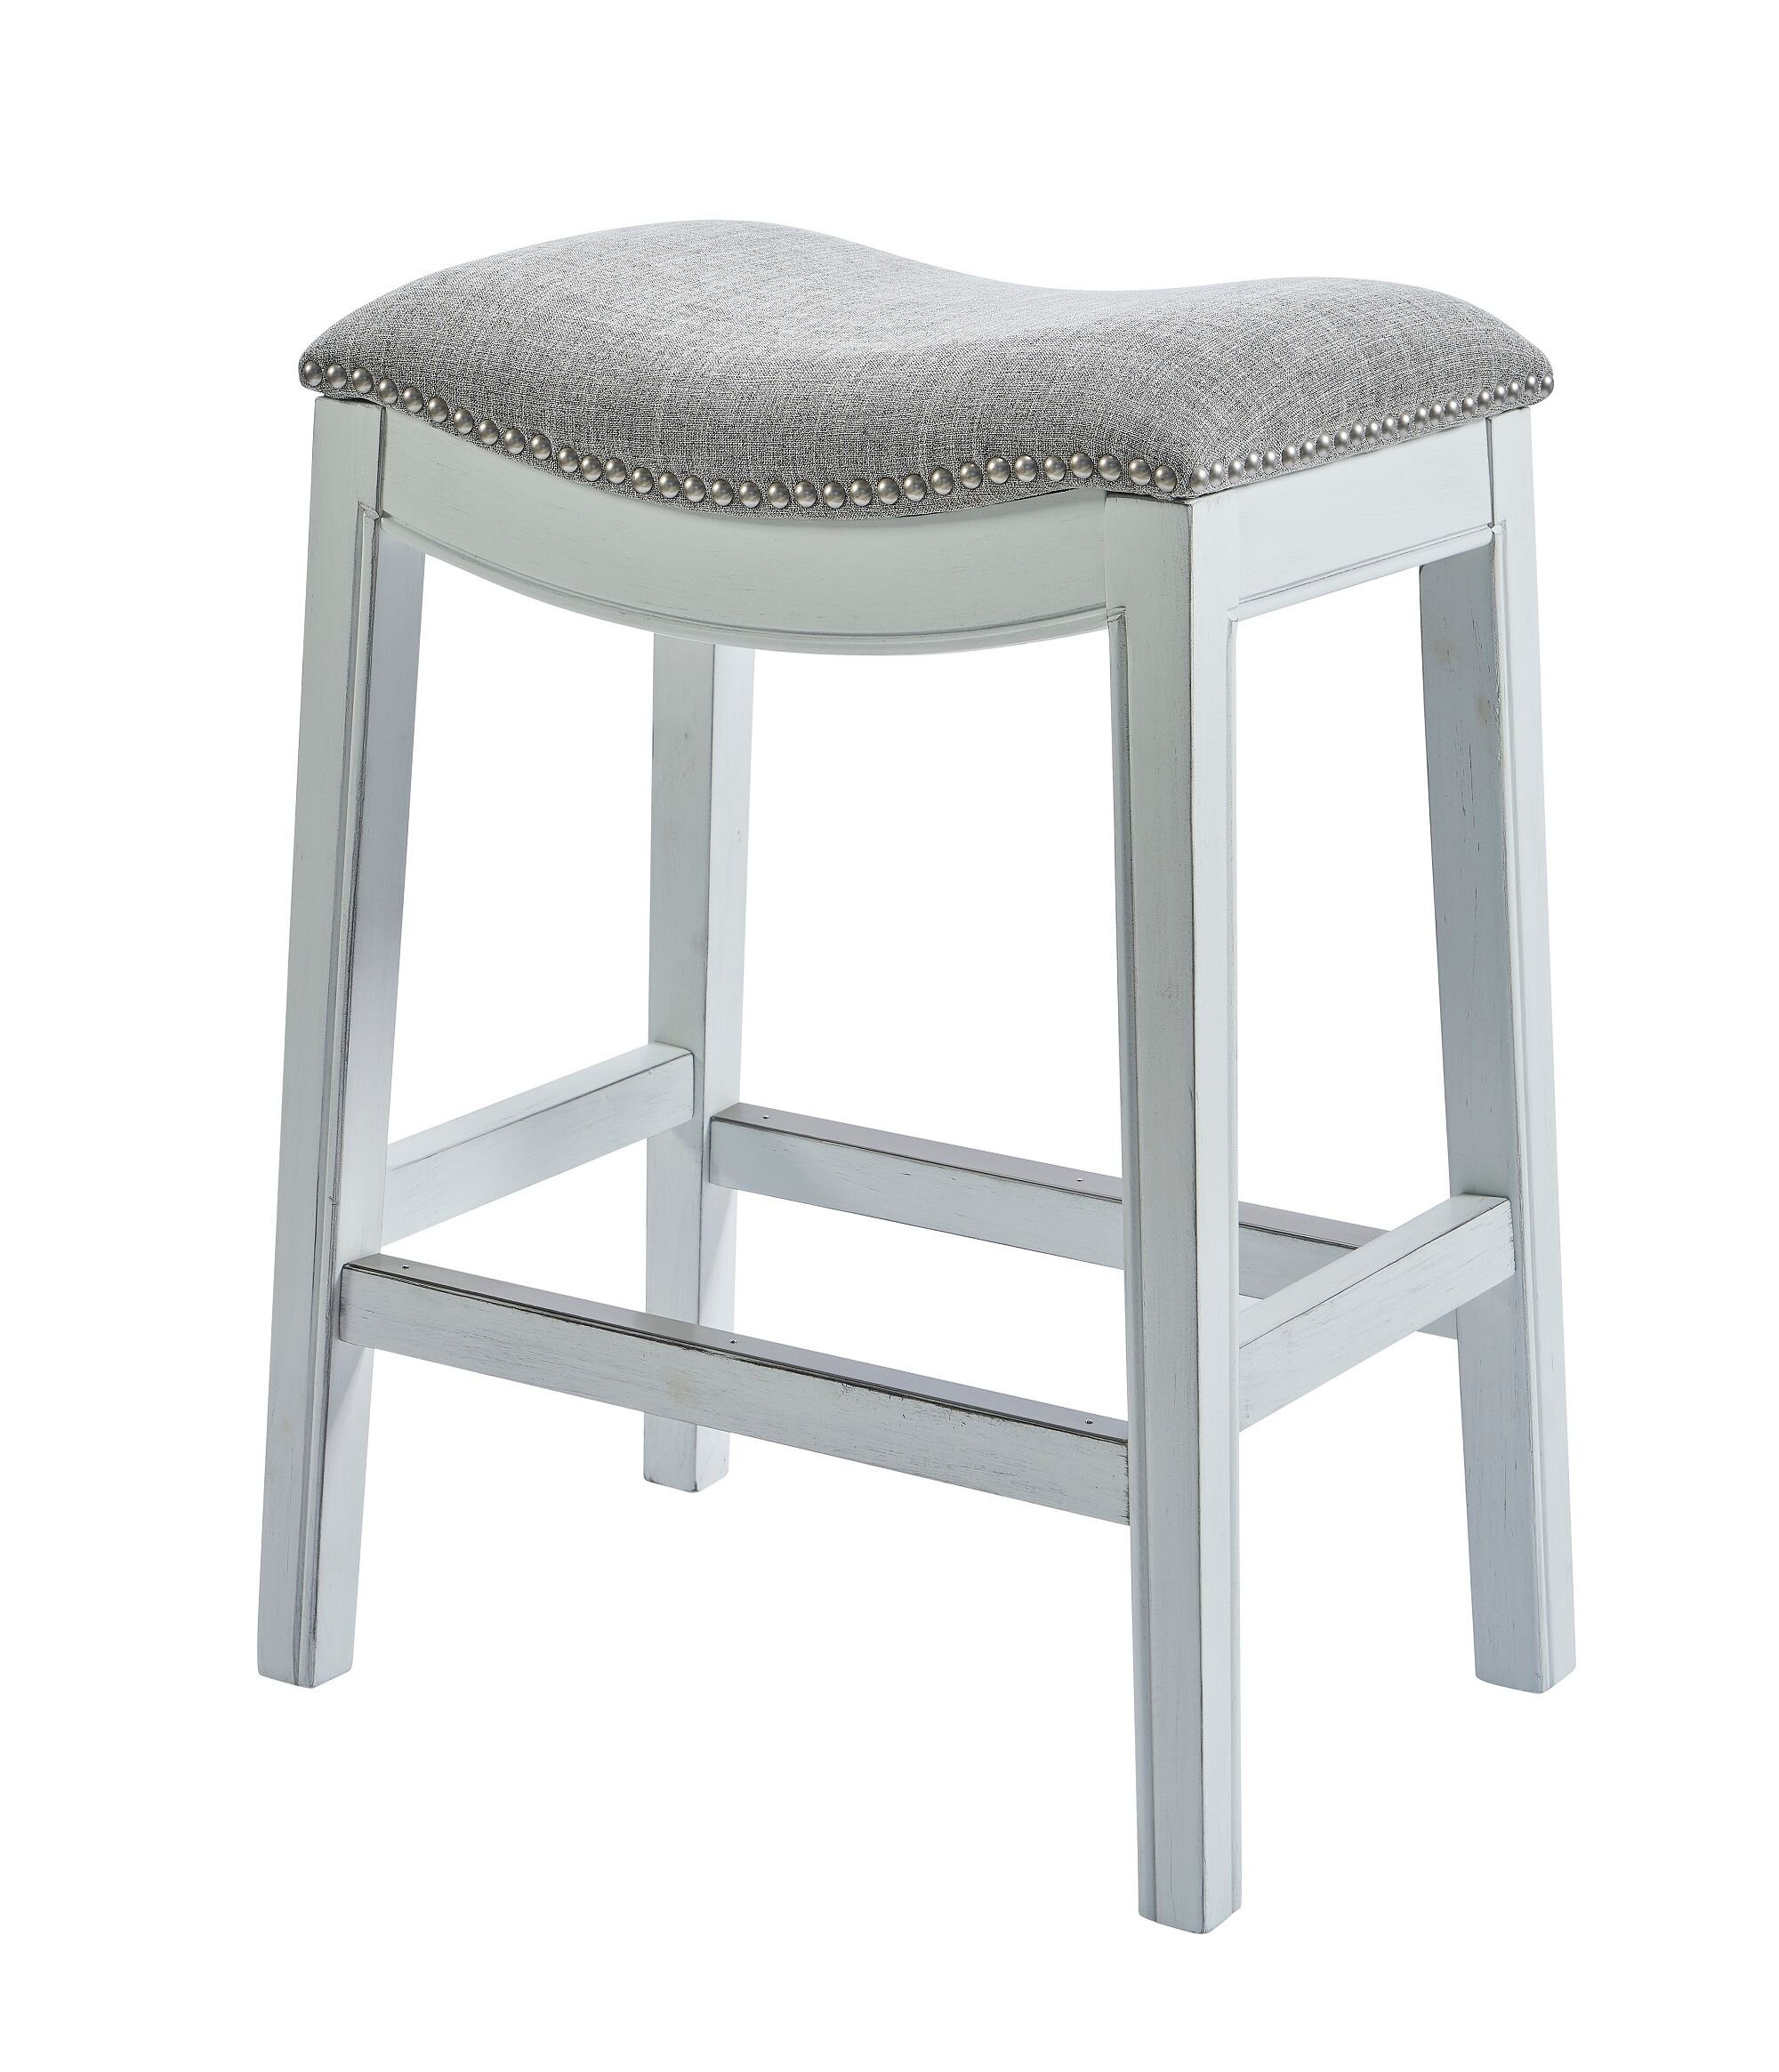 Barstools New Ridge Home Goods, Halsted Backless Bar & Counter Stools